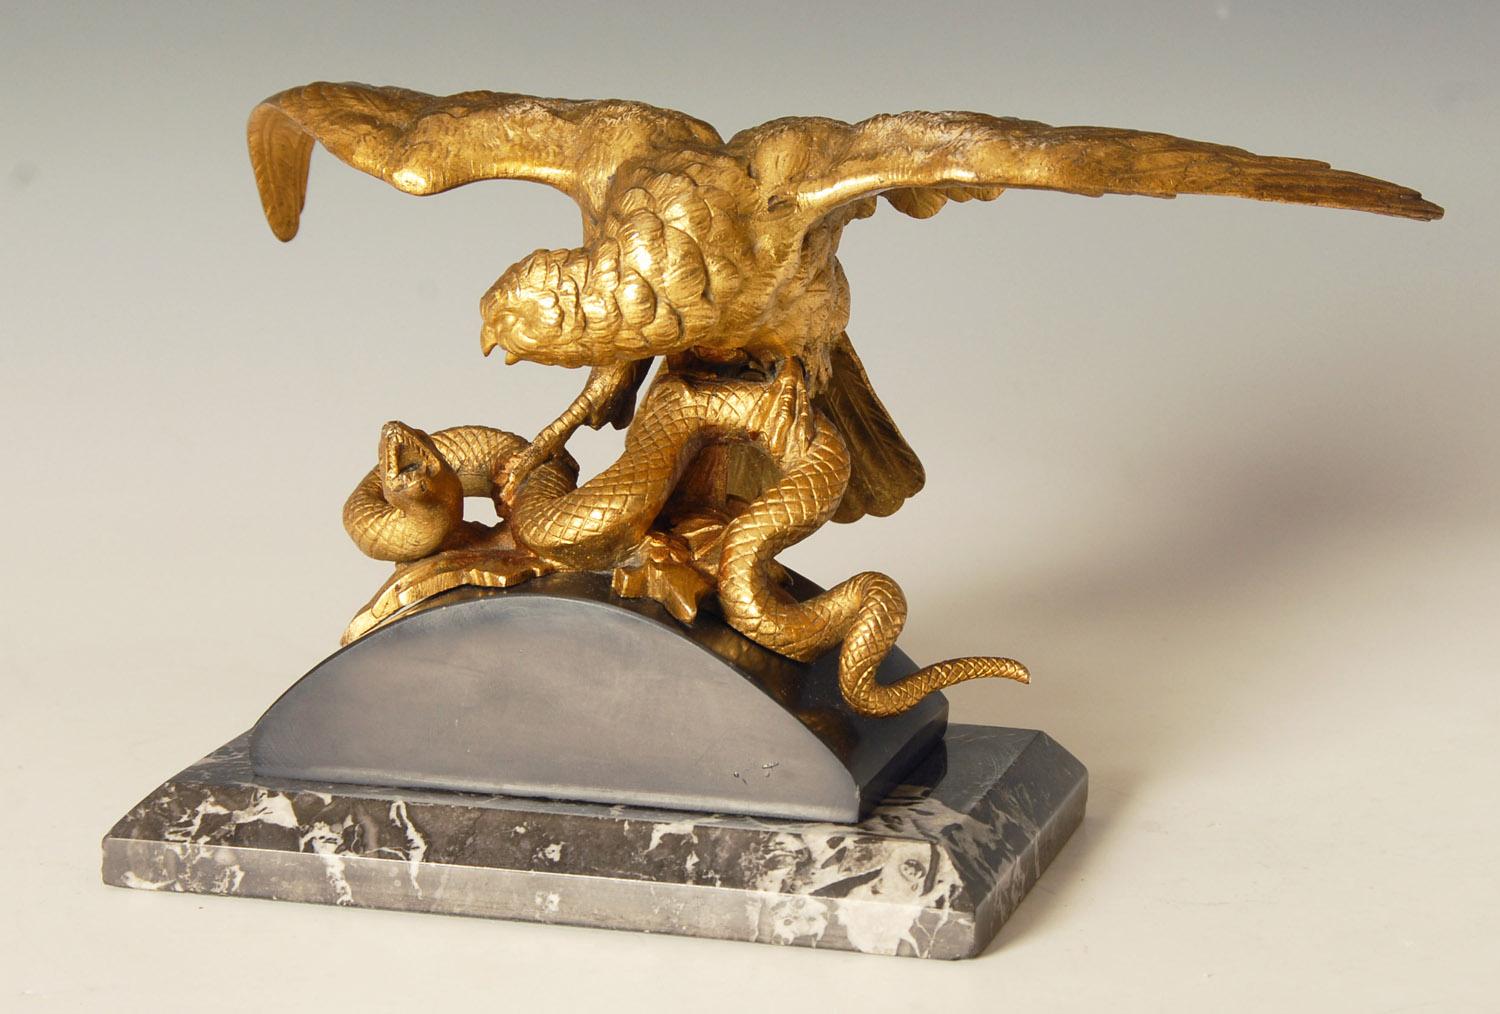 18th Century 19th Century French Ormolu on Bronze Study of an Eagle Attacking a Snake For Sale